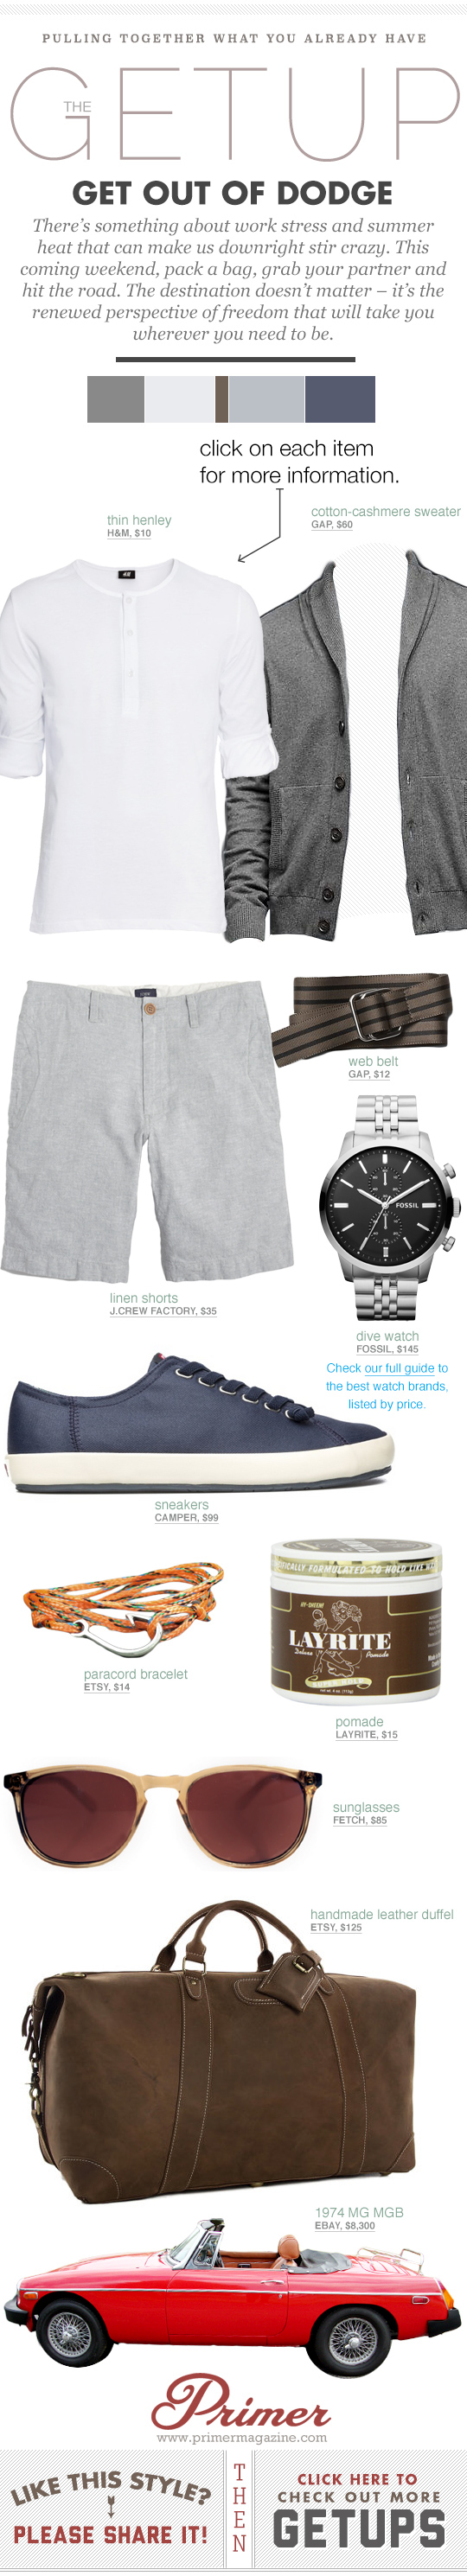 Get Out of Dodge Getup with gray sweater, white henley, linen shorts, and blue sneakers